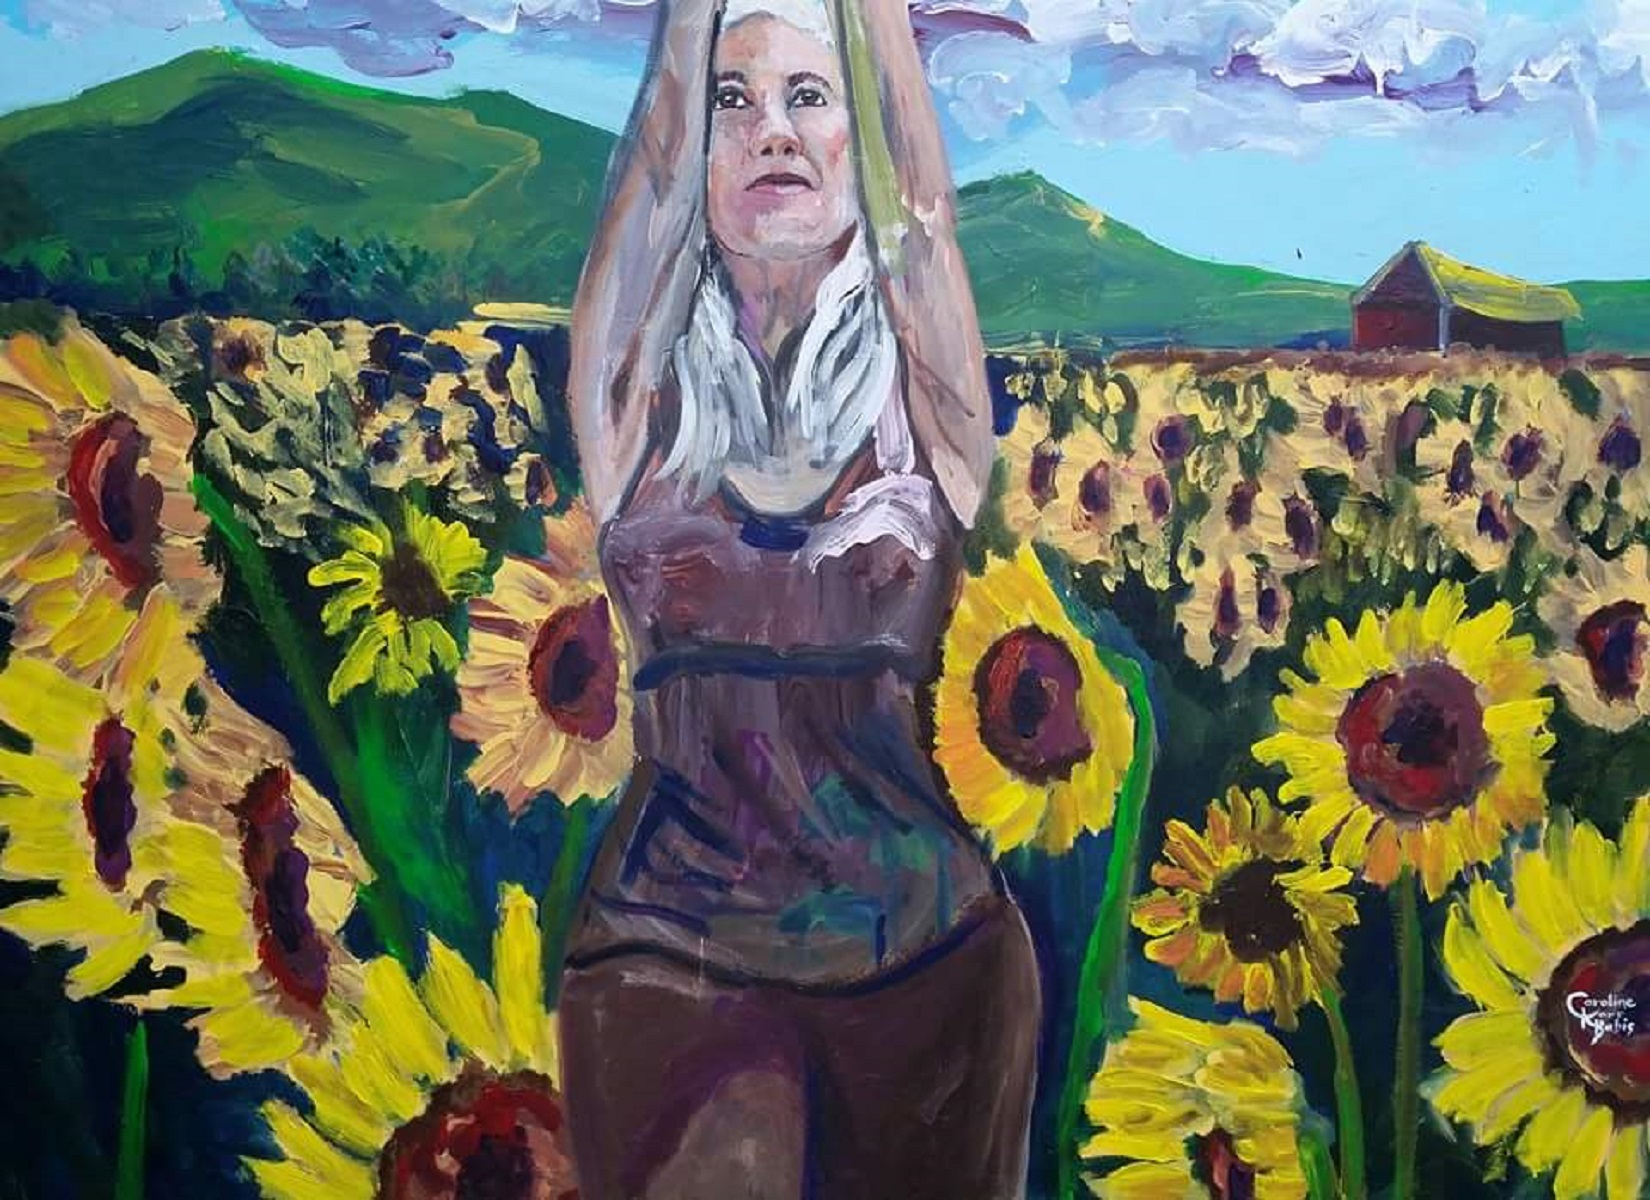 Live Action Expressionist Portrait: The Sunflower Warrior Girl...A self portrait of the artist